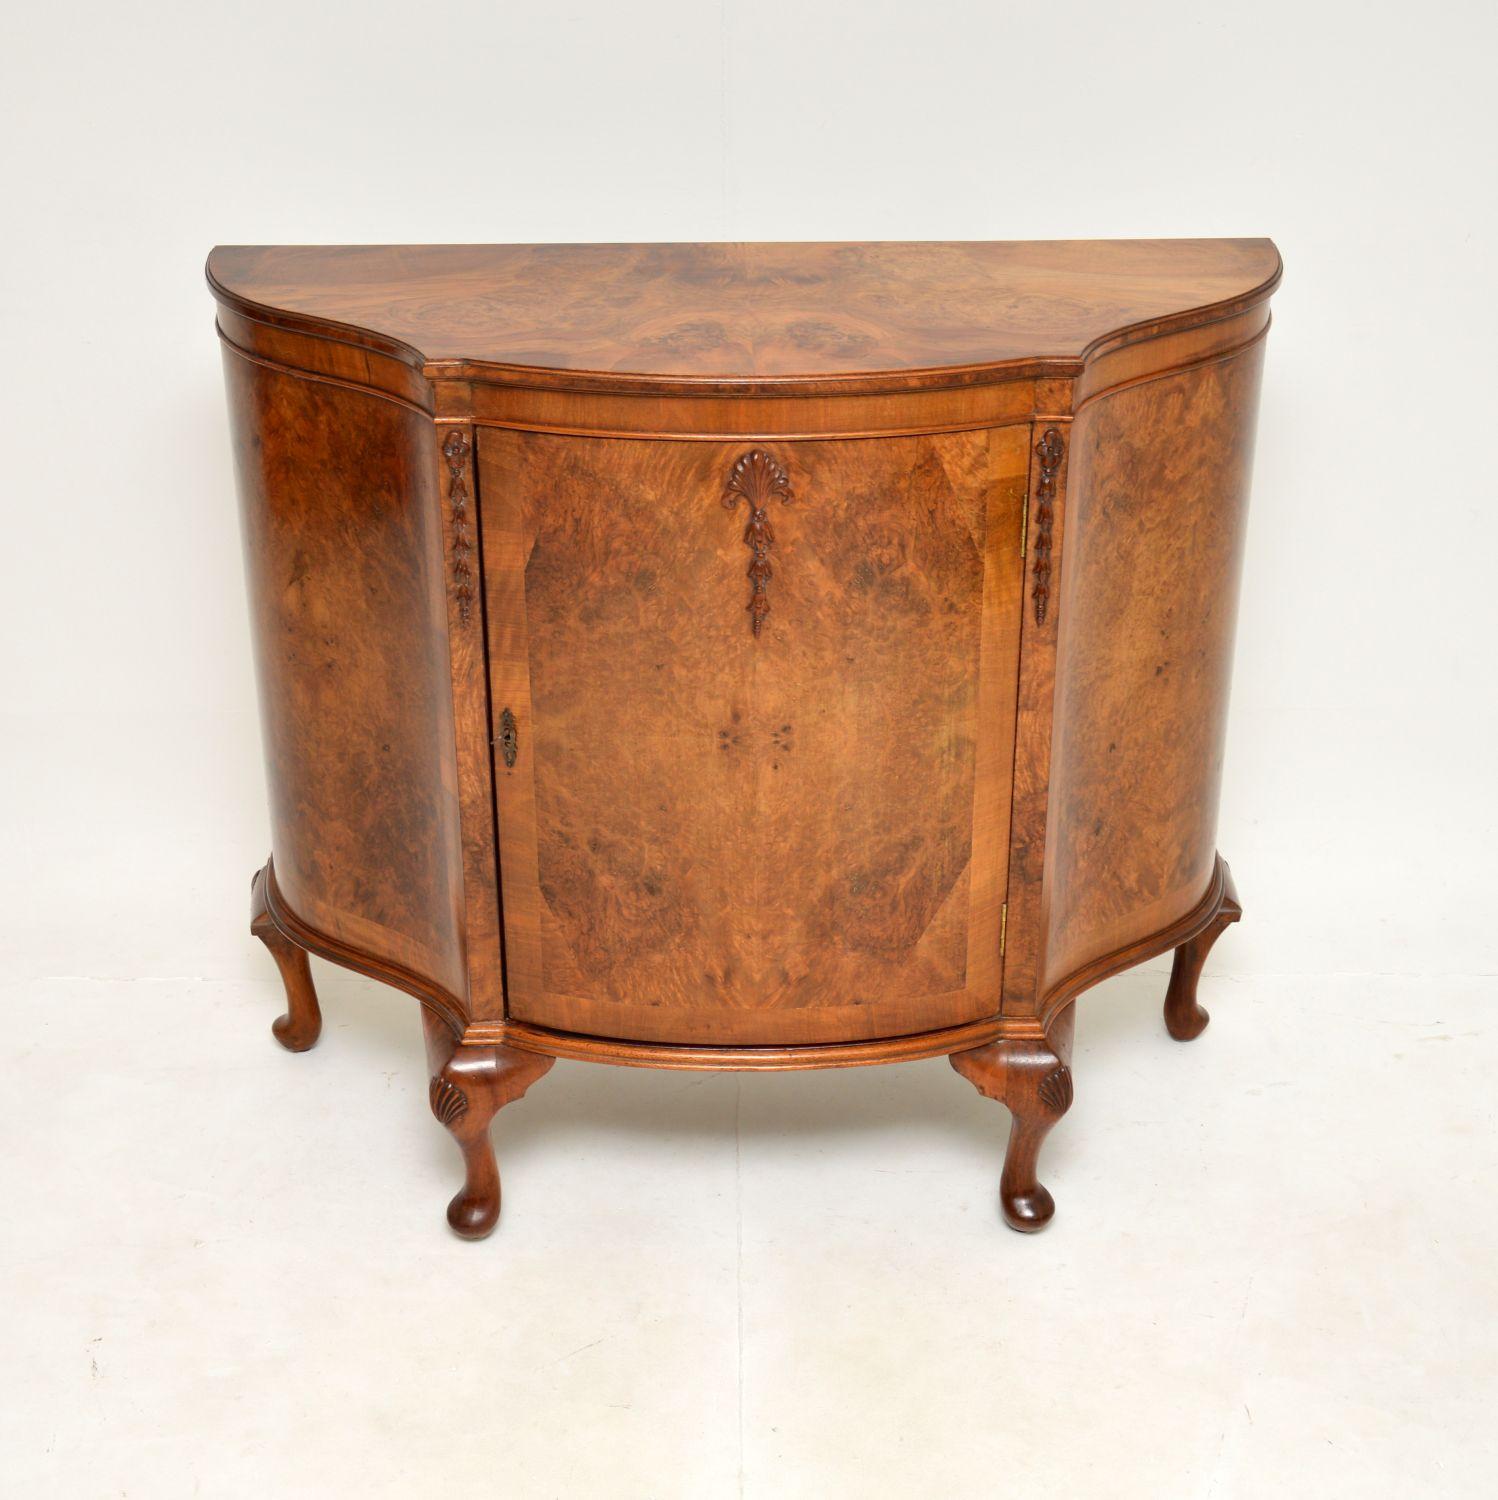 An exceptional antique burr walnut Queen Anne style cabinet. This was made in England, it dates from around the 1900-1920 period.

It is of outstanding quality, with stunning burr walnut grain patterns and a gorgeous colour tone. There is crisp